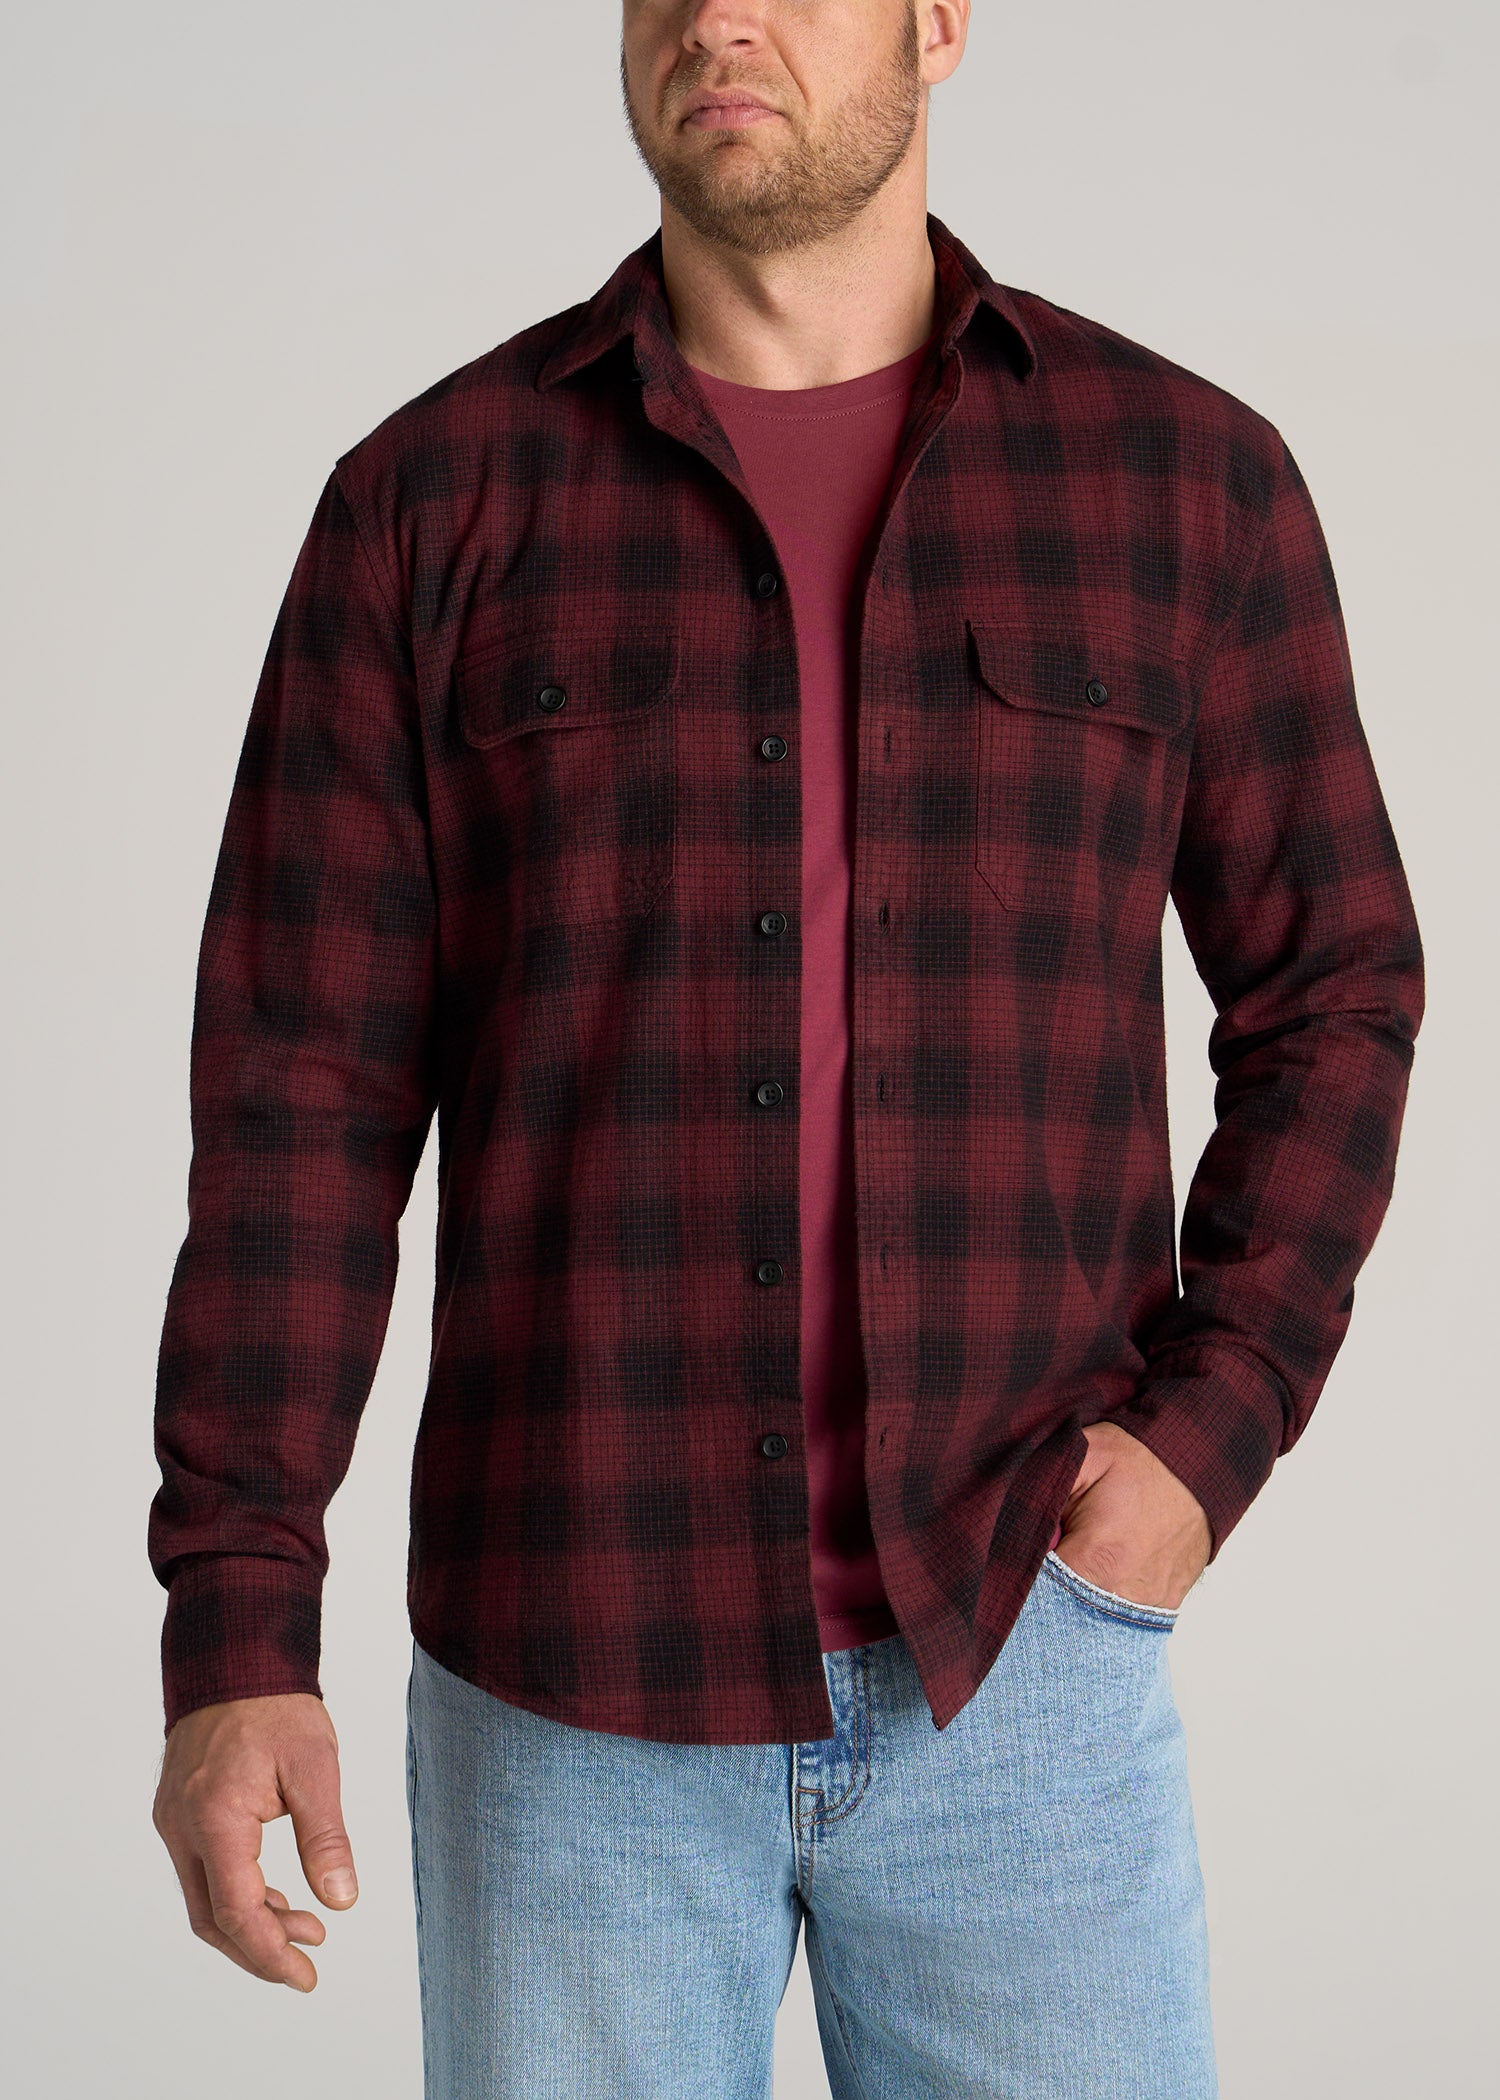 LJ&S Men's Tall Heavy Flannel Shirt in Army Plaid-Black & Sumac Red S / Tall / Army Plaid-Black & Sumac Red